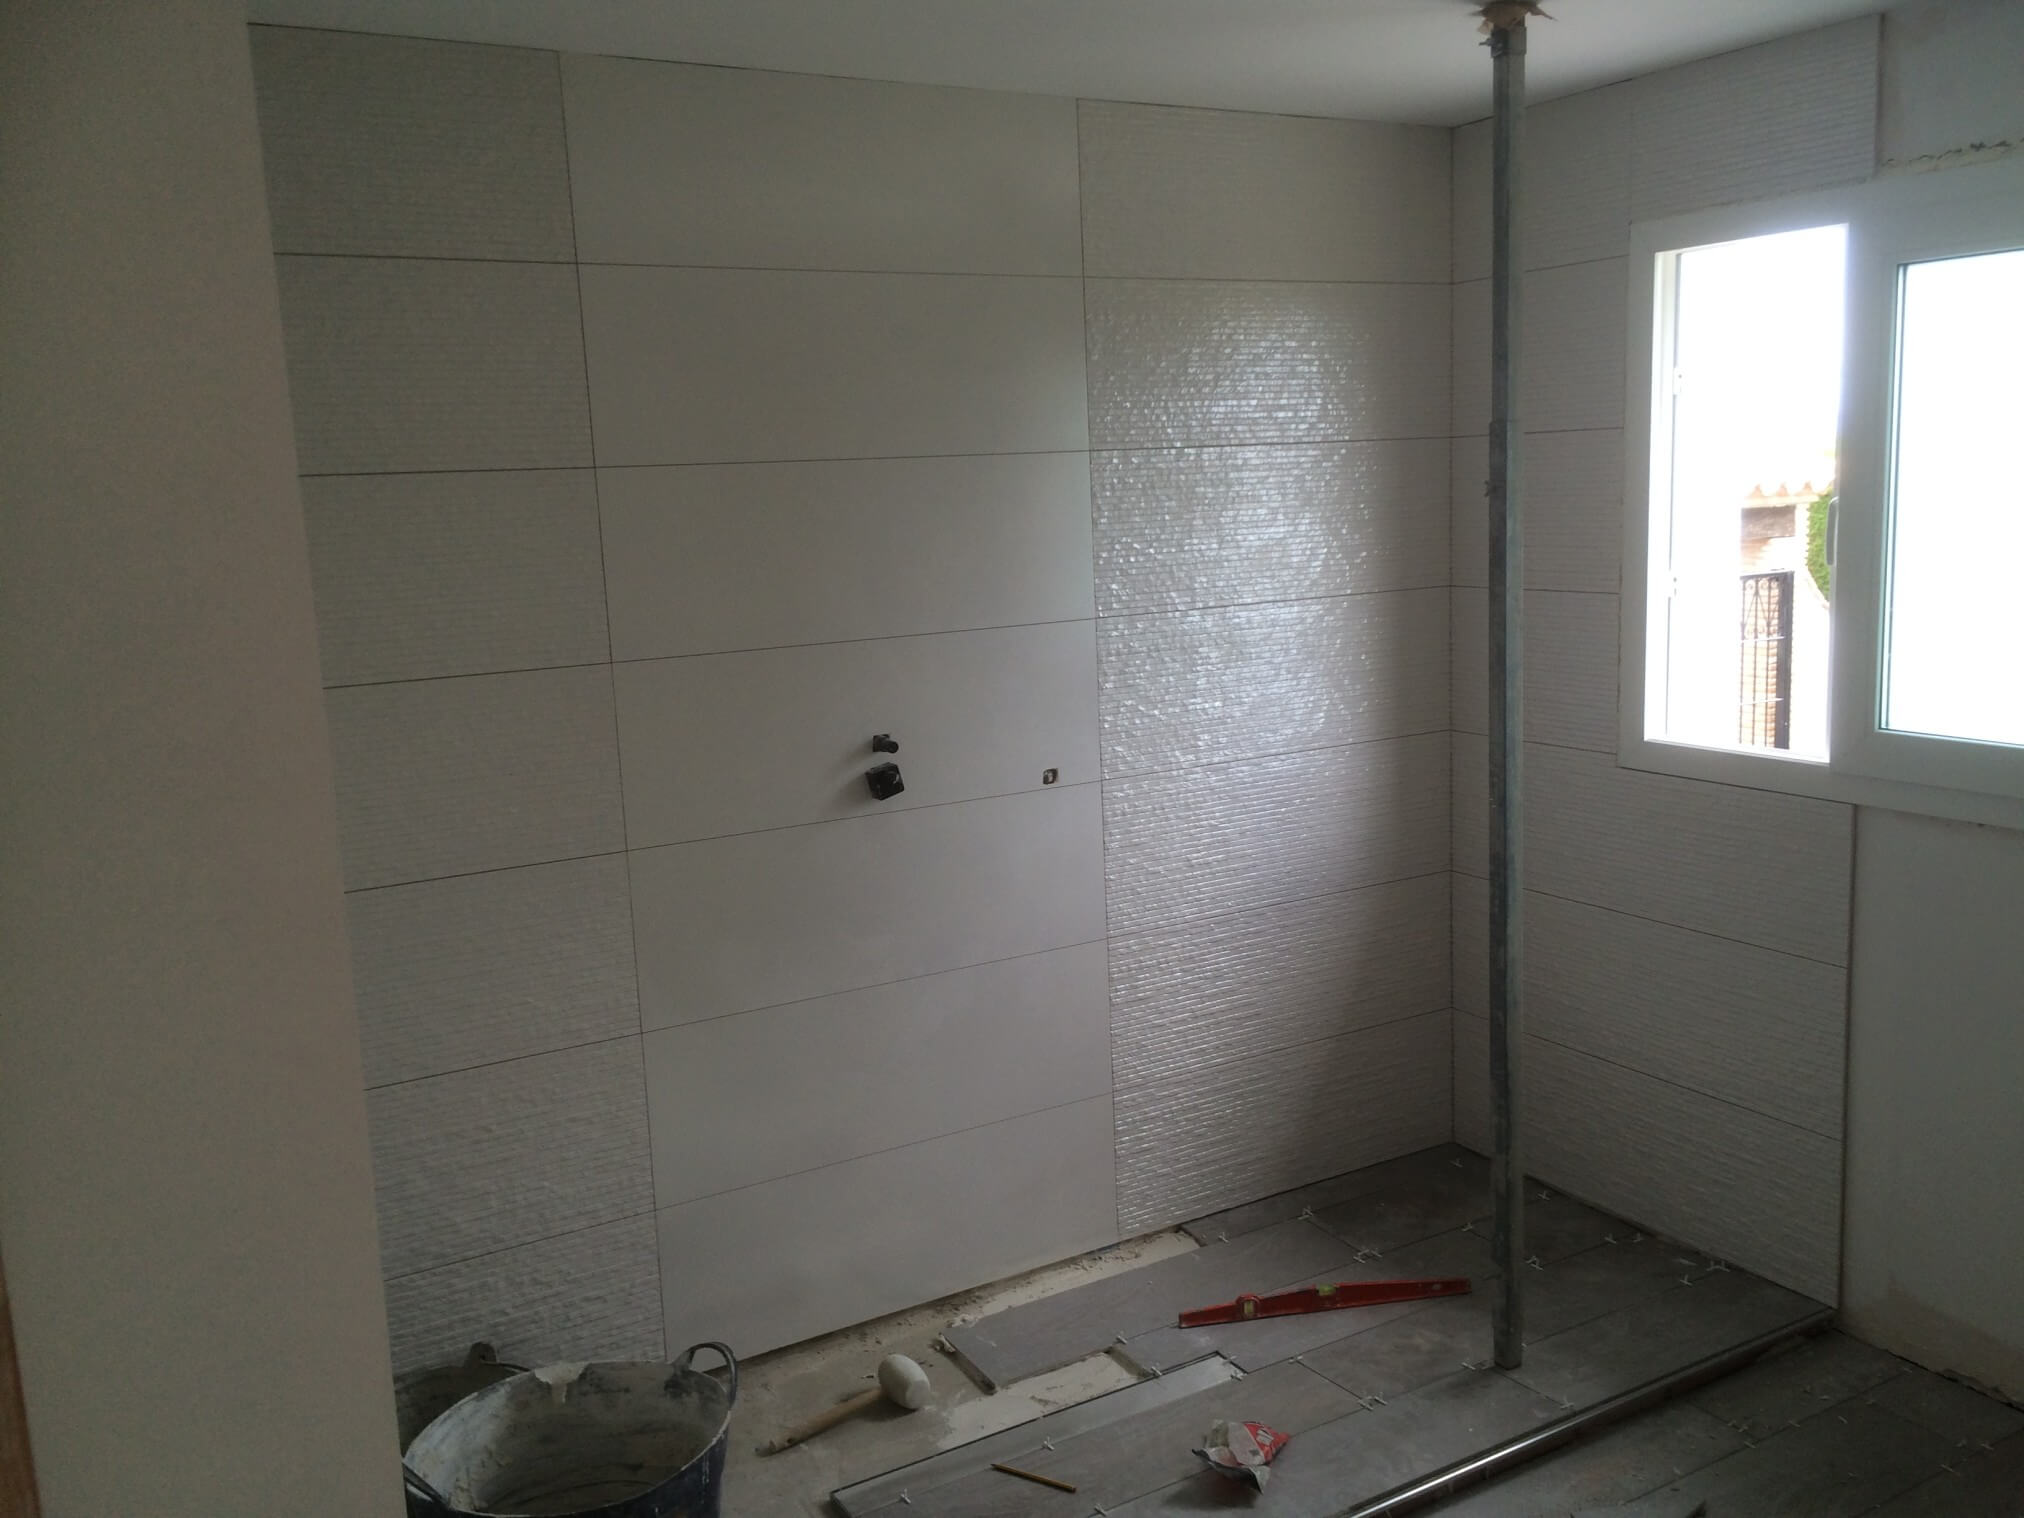 Large tiles being applied to the bathroom walls